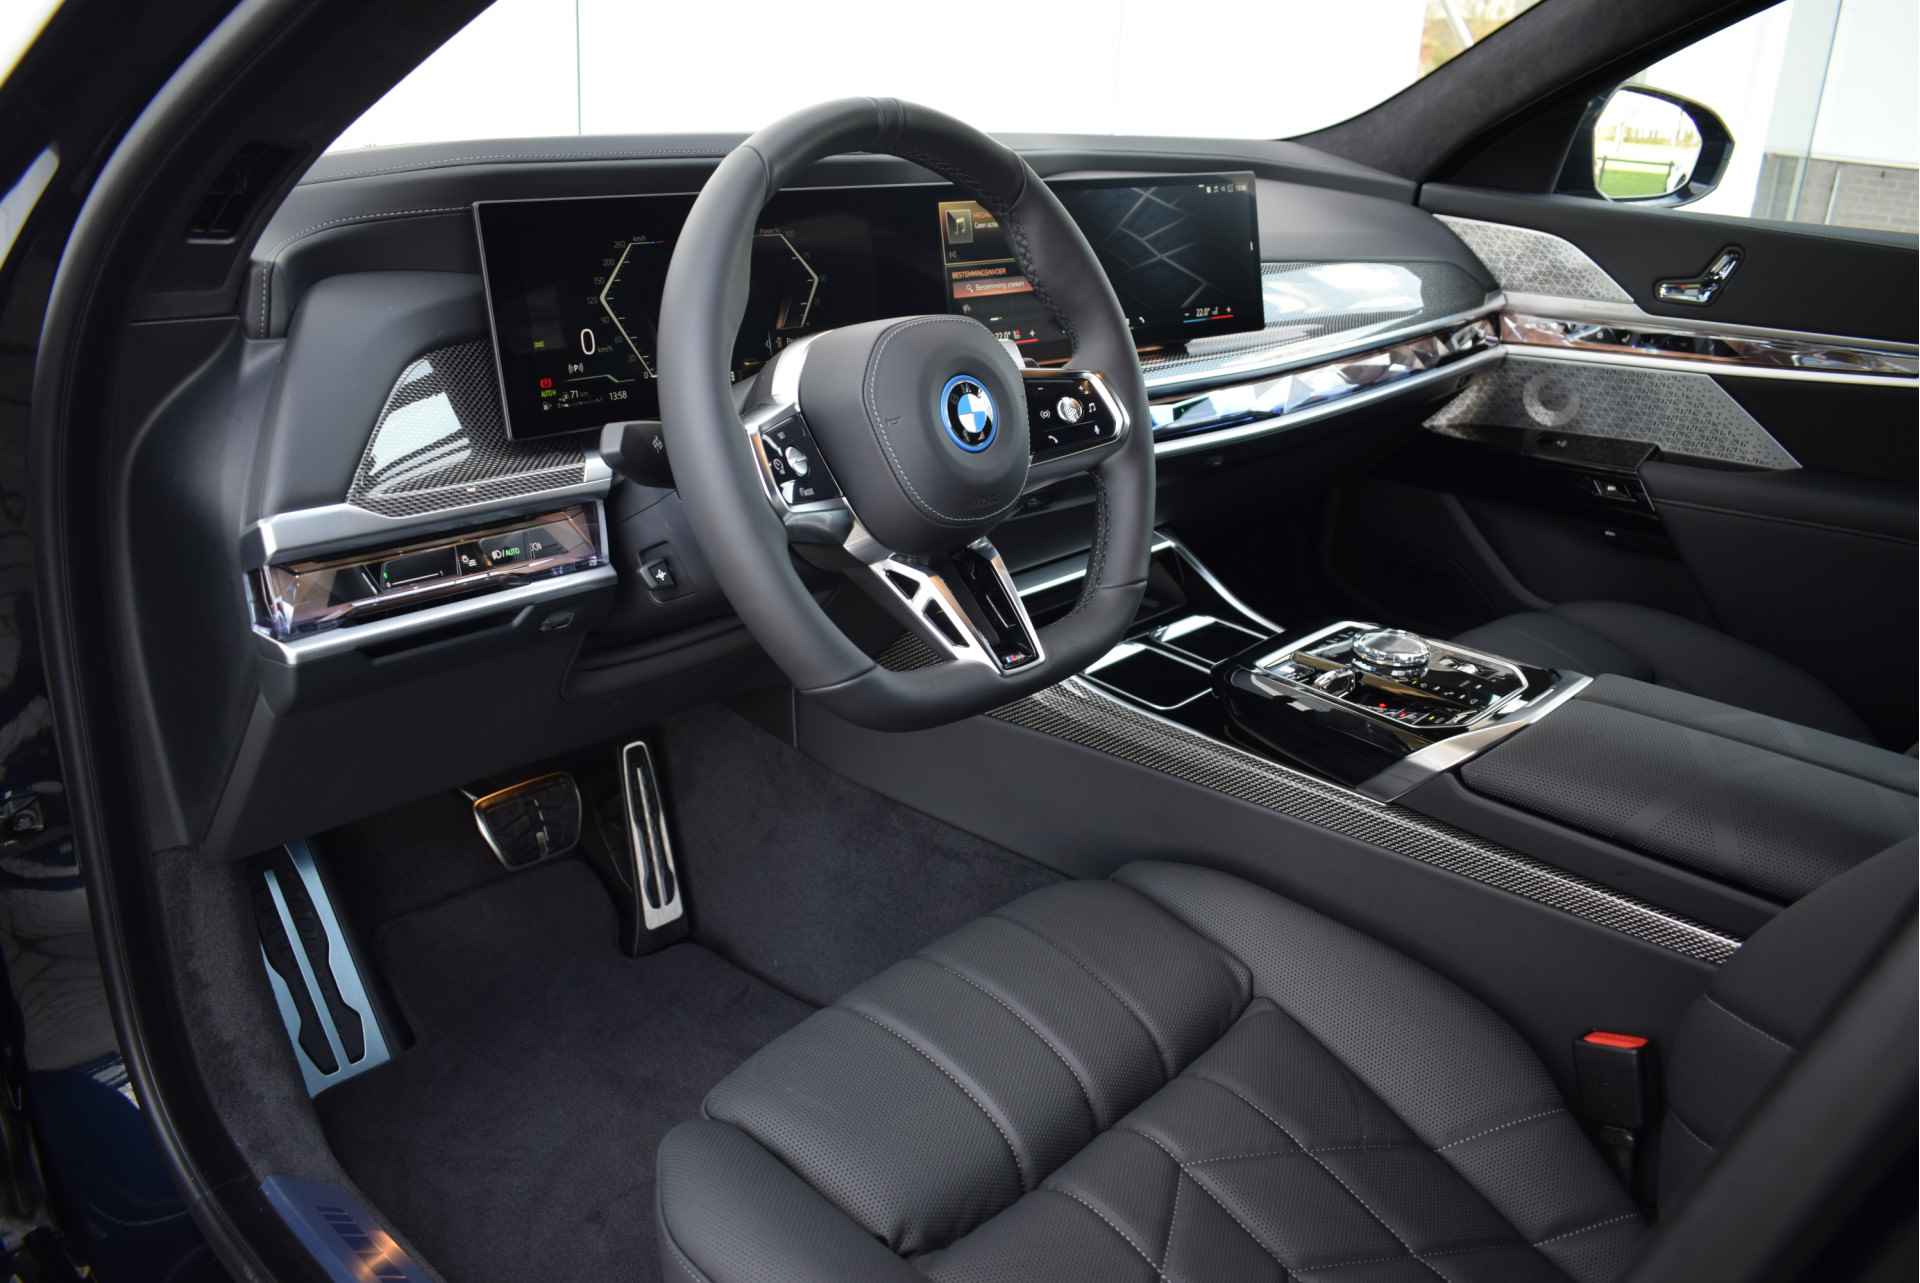 BMW 7 Serie 750e xDrive High Executive M Sport Automaat / Panoramadak Sky Lounge / Trekhaak / Bowers & Wilkins / Parking Assistant Professional / Active Steering / Executive Lounge Seating - 25/41